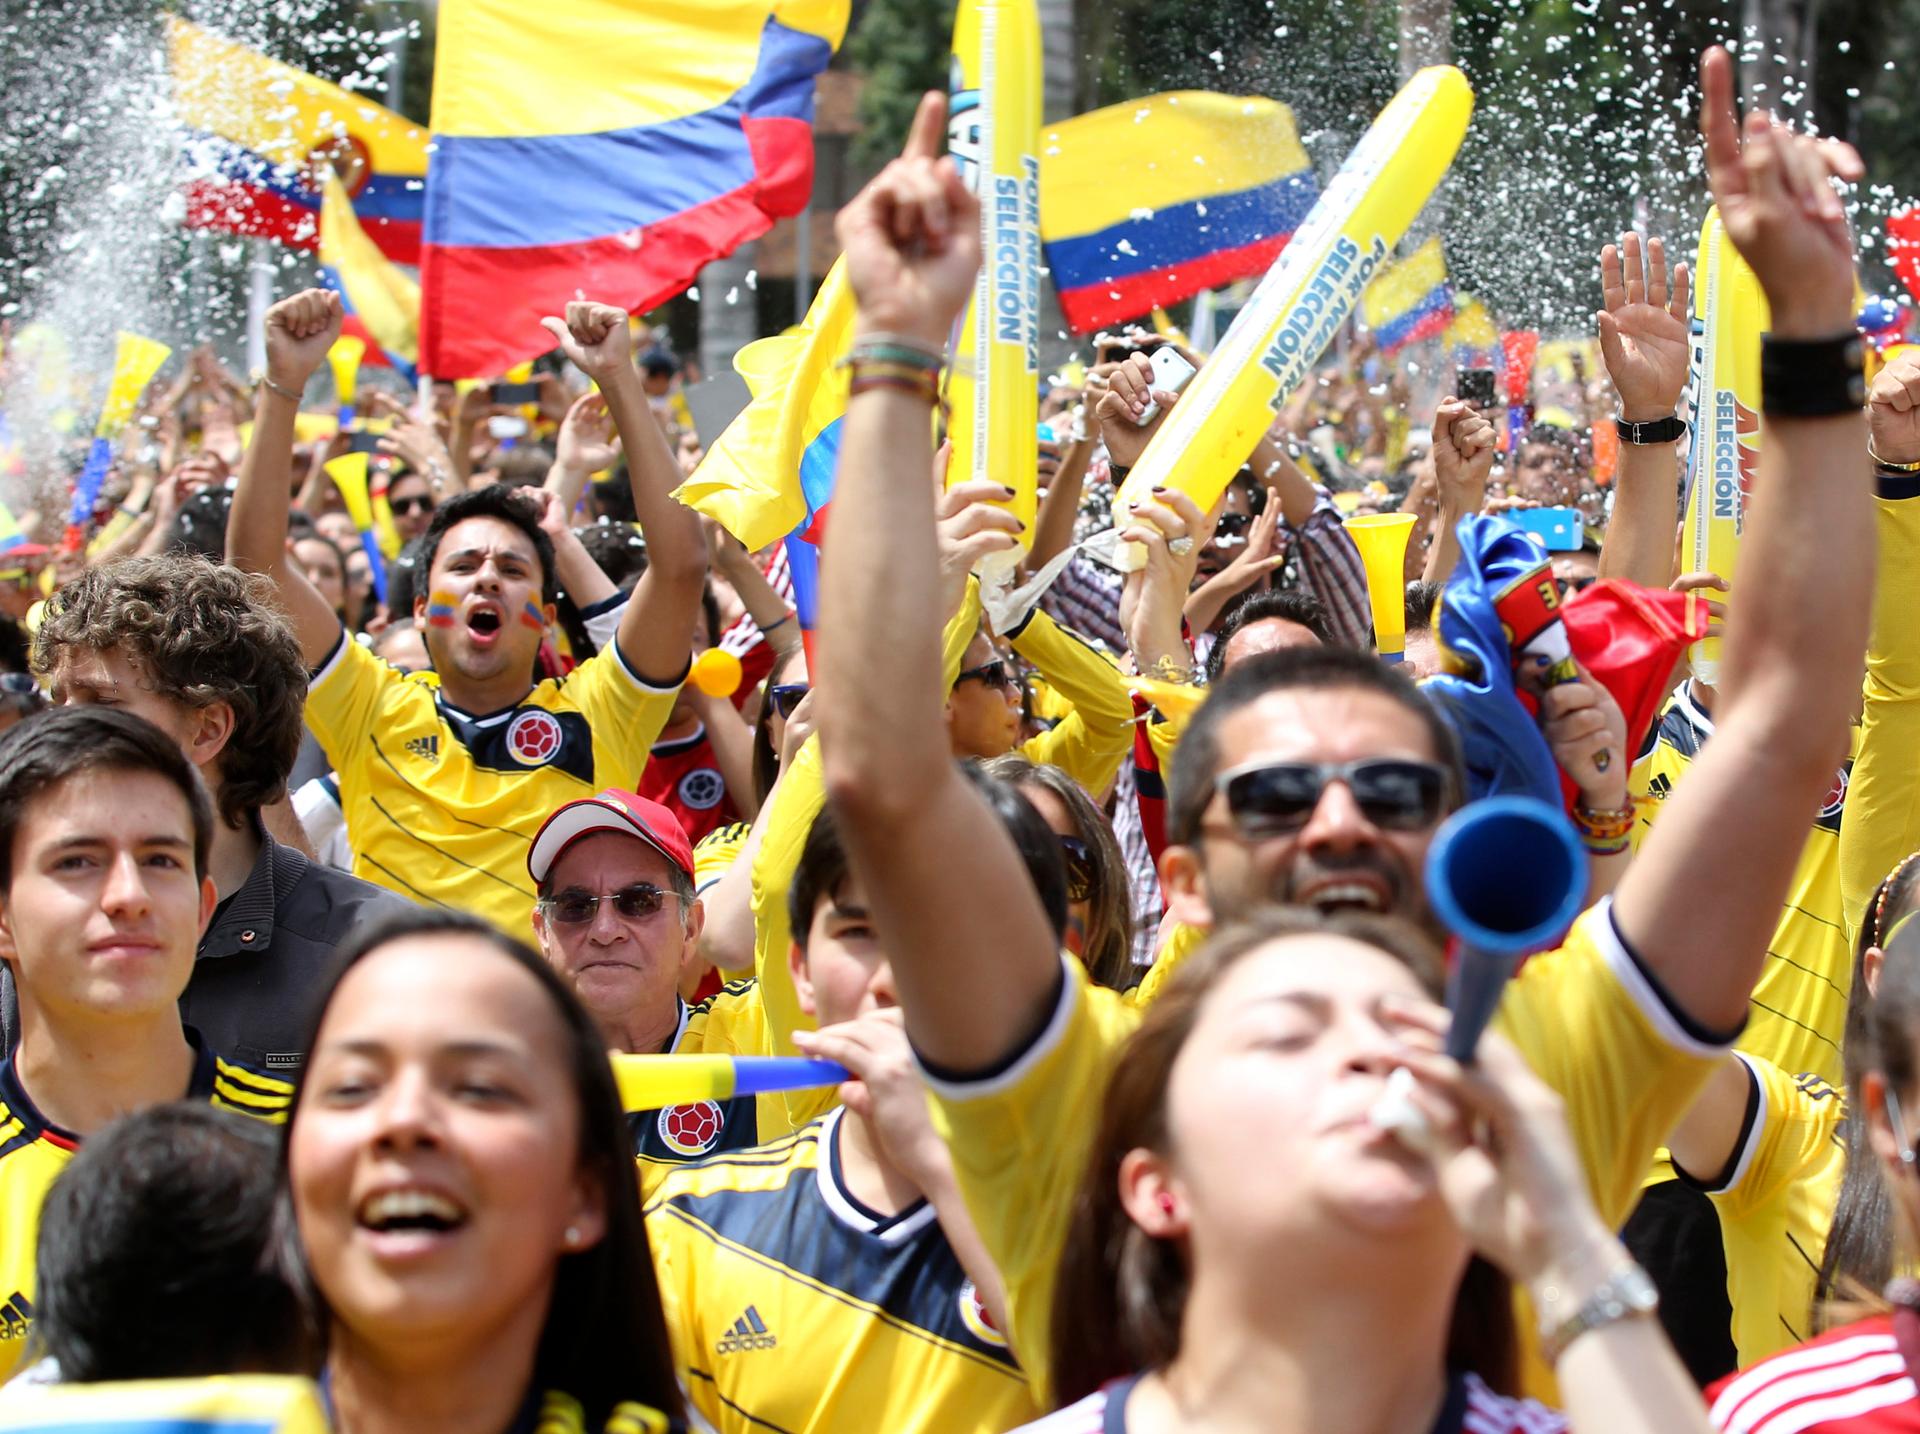 Colombia fans celebrate as they gather before the World Cup Group C soccer match between Colombia and Greece. After the 3-0 win, nine Colombians died in the alcohol-fueled postgame parties.